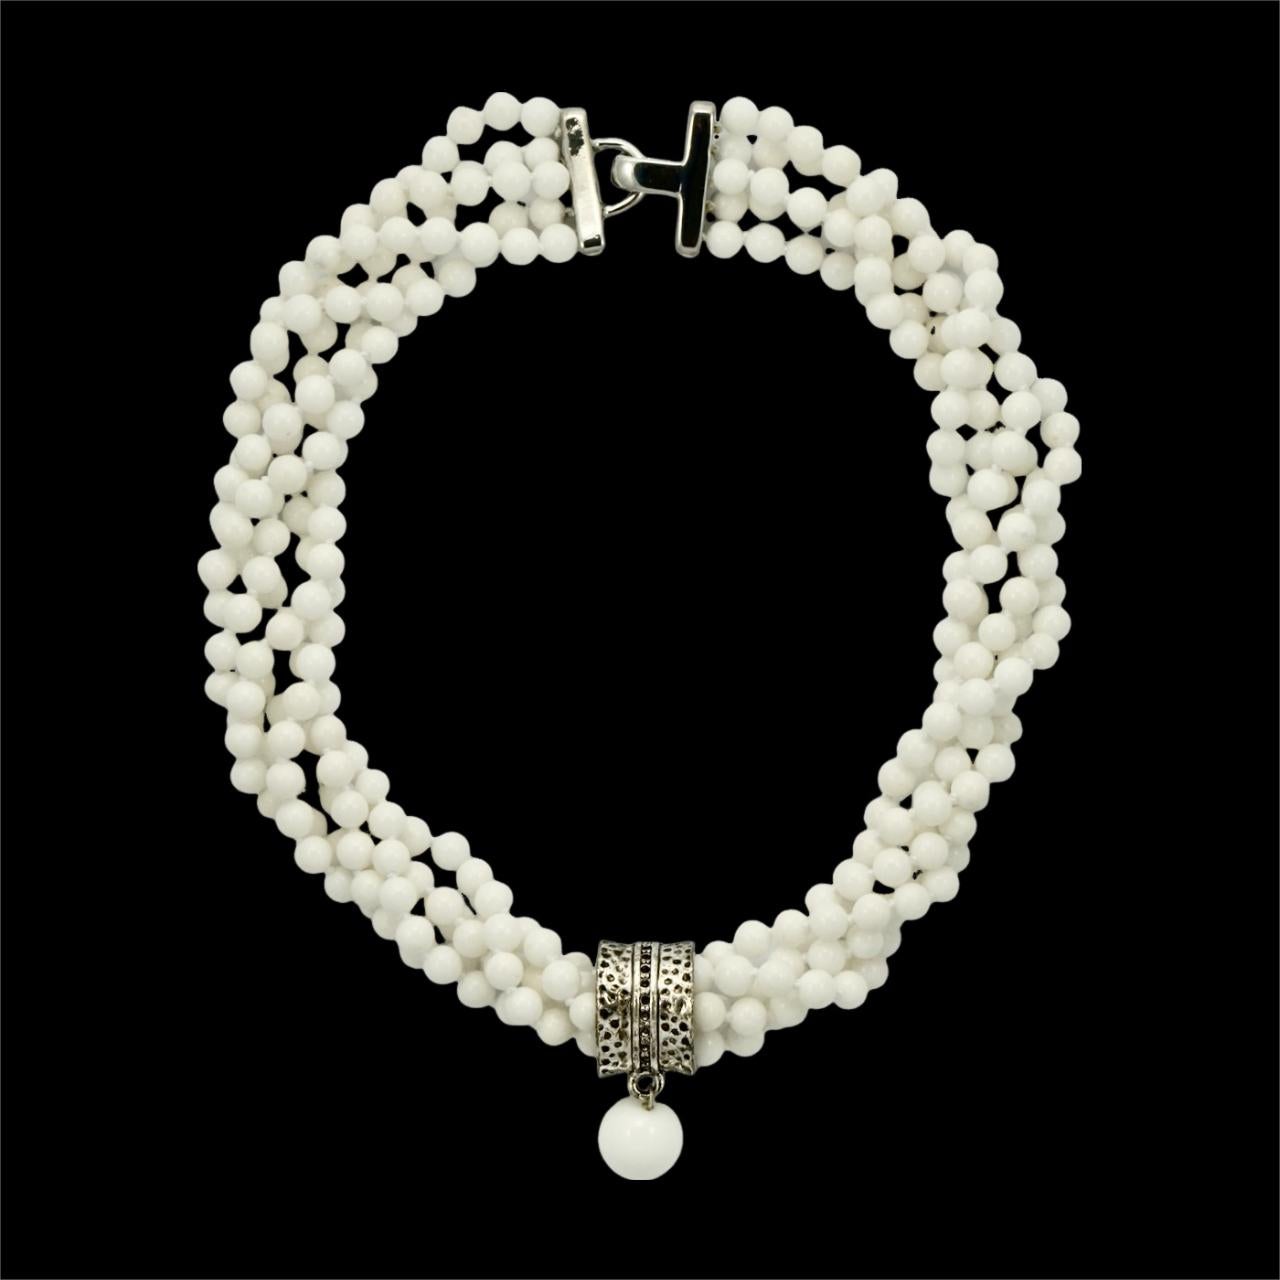 Twisted White Bead Necklace with Silver Plated and Black Enamel Pendant For Sale 3